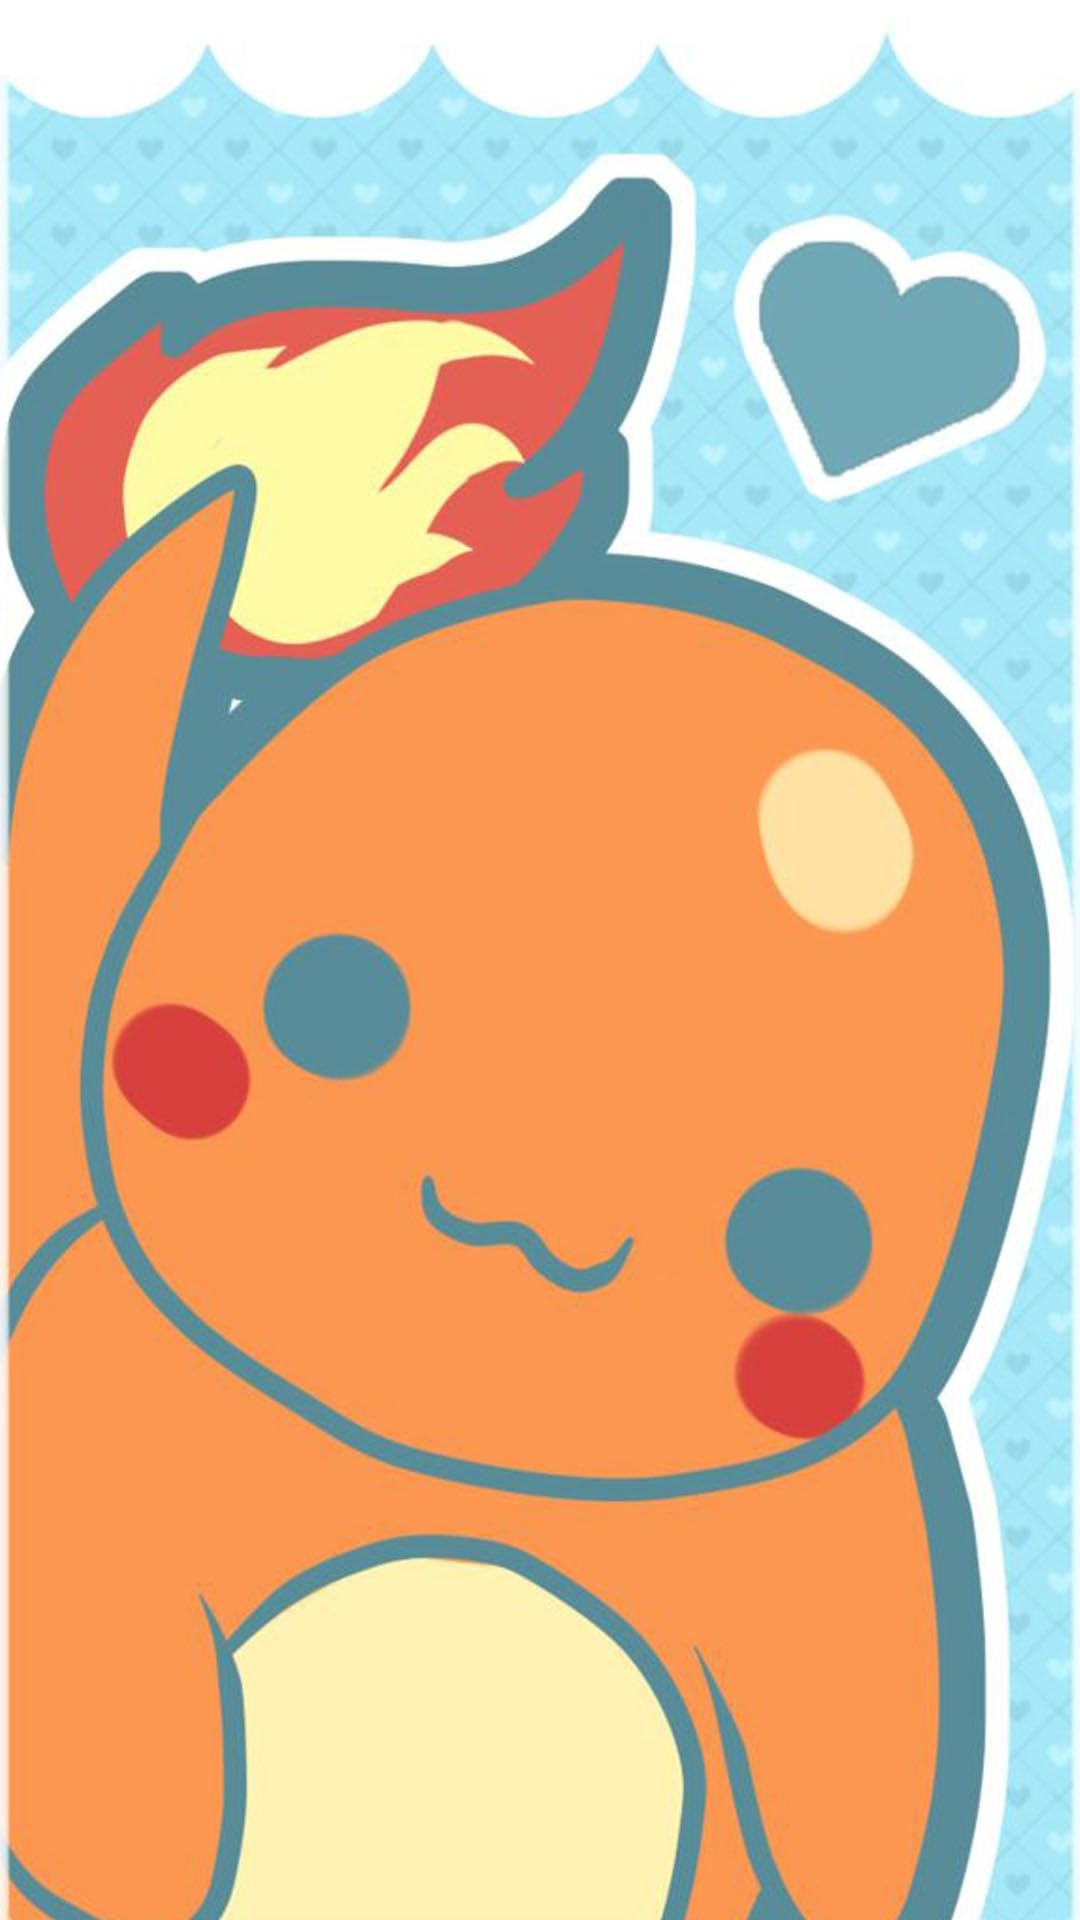 This Charmander wallpaper is so cute, it's easy to forget that he's a  fire-breathing dragon!